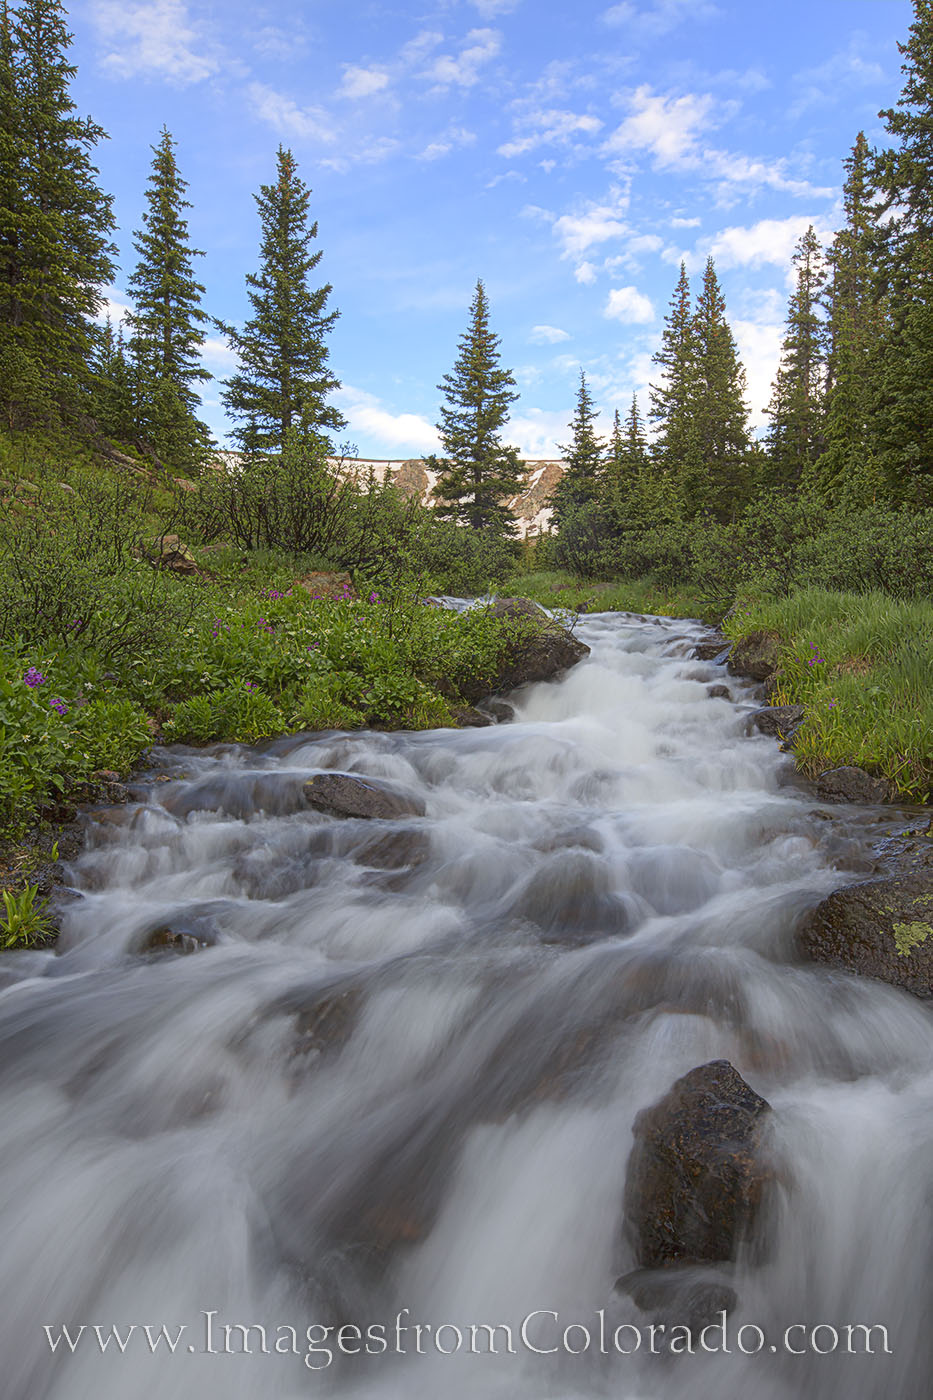 After an early morning of photographing wildflowers high above Highway 40 on Berthoud Pass, I was winding my way down when I...